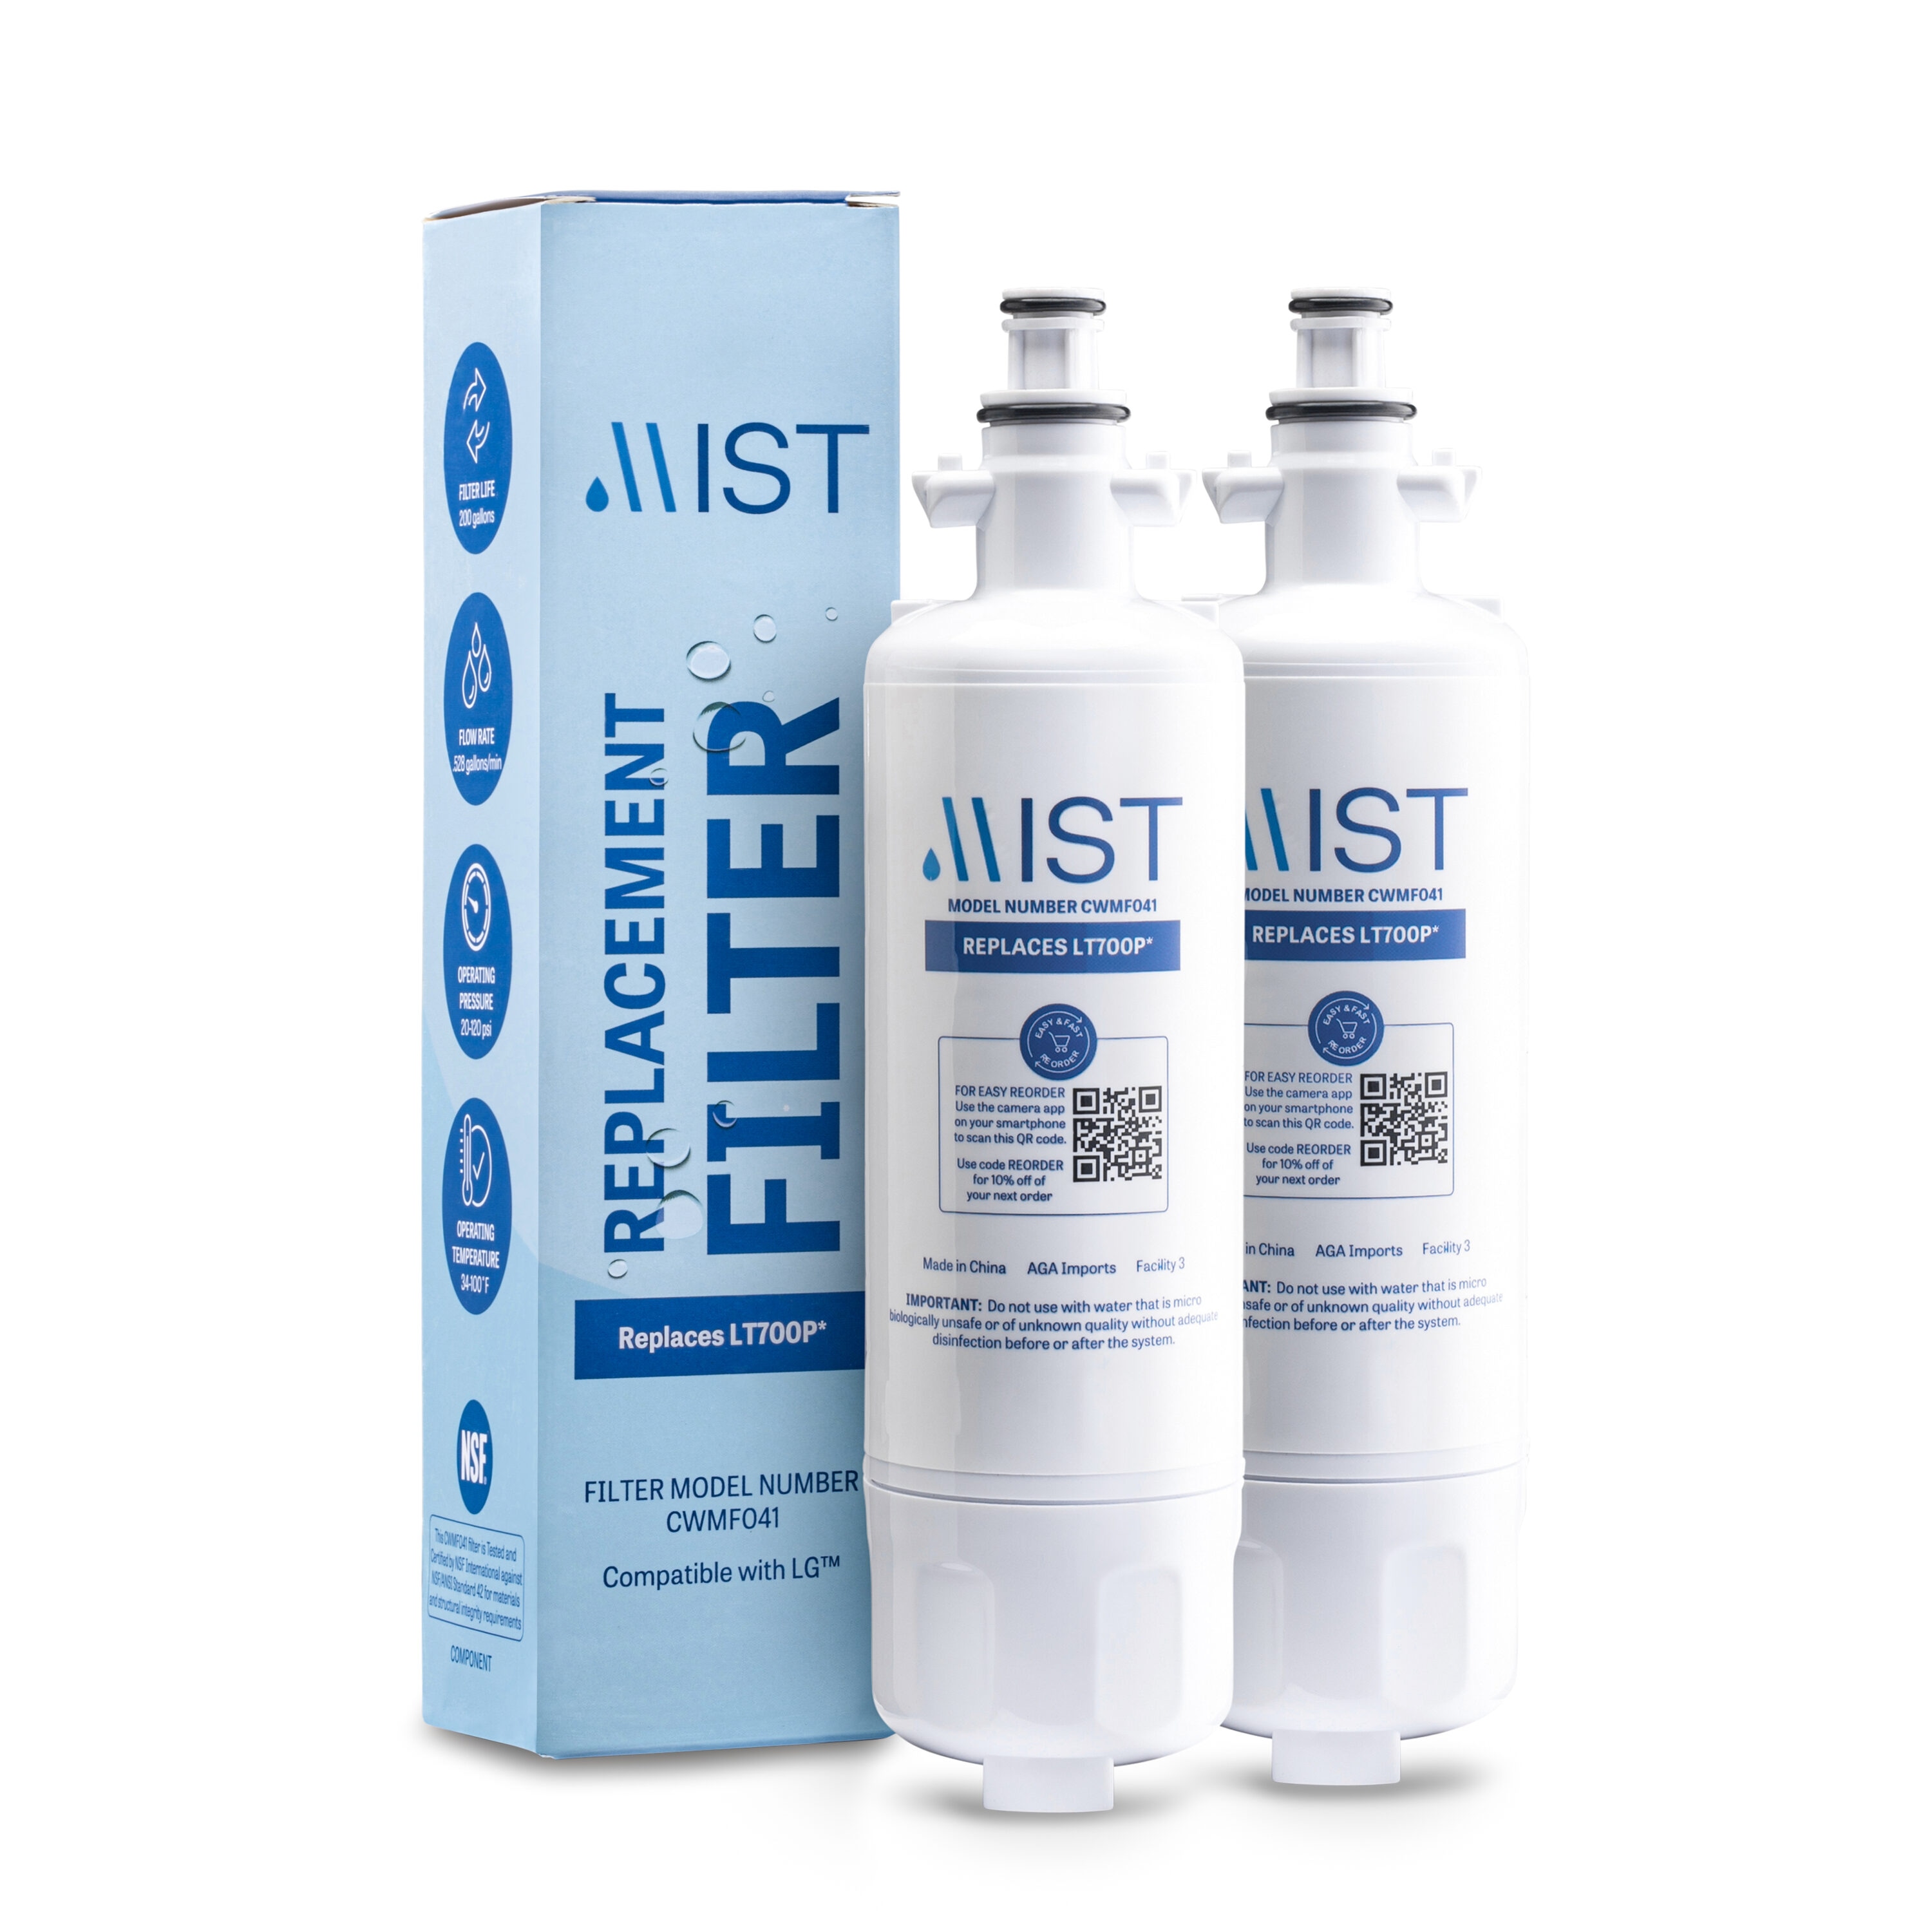 Ultrawf Water Filter: The Ultimate Solution for Clean and Healthy Water